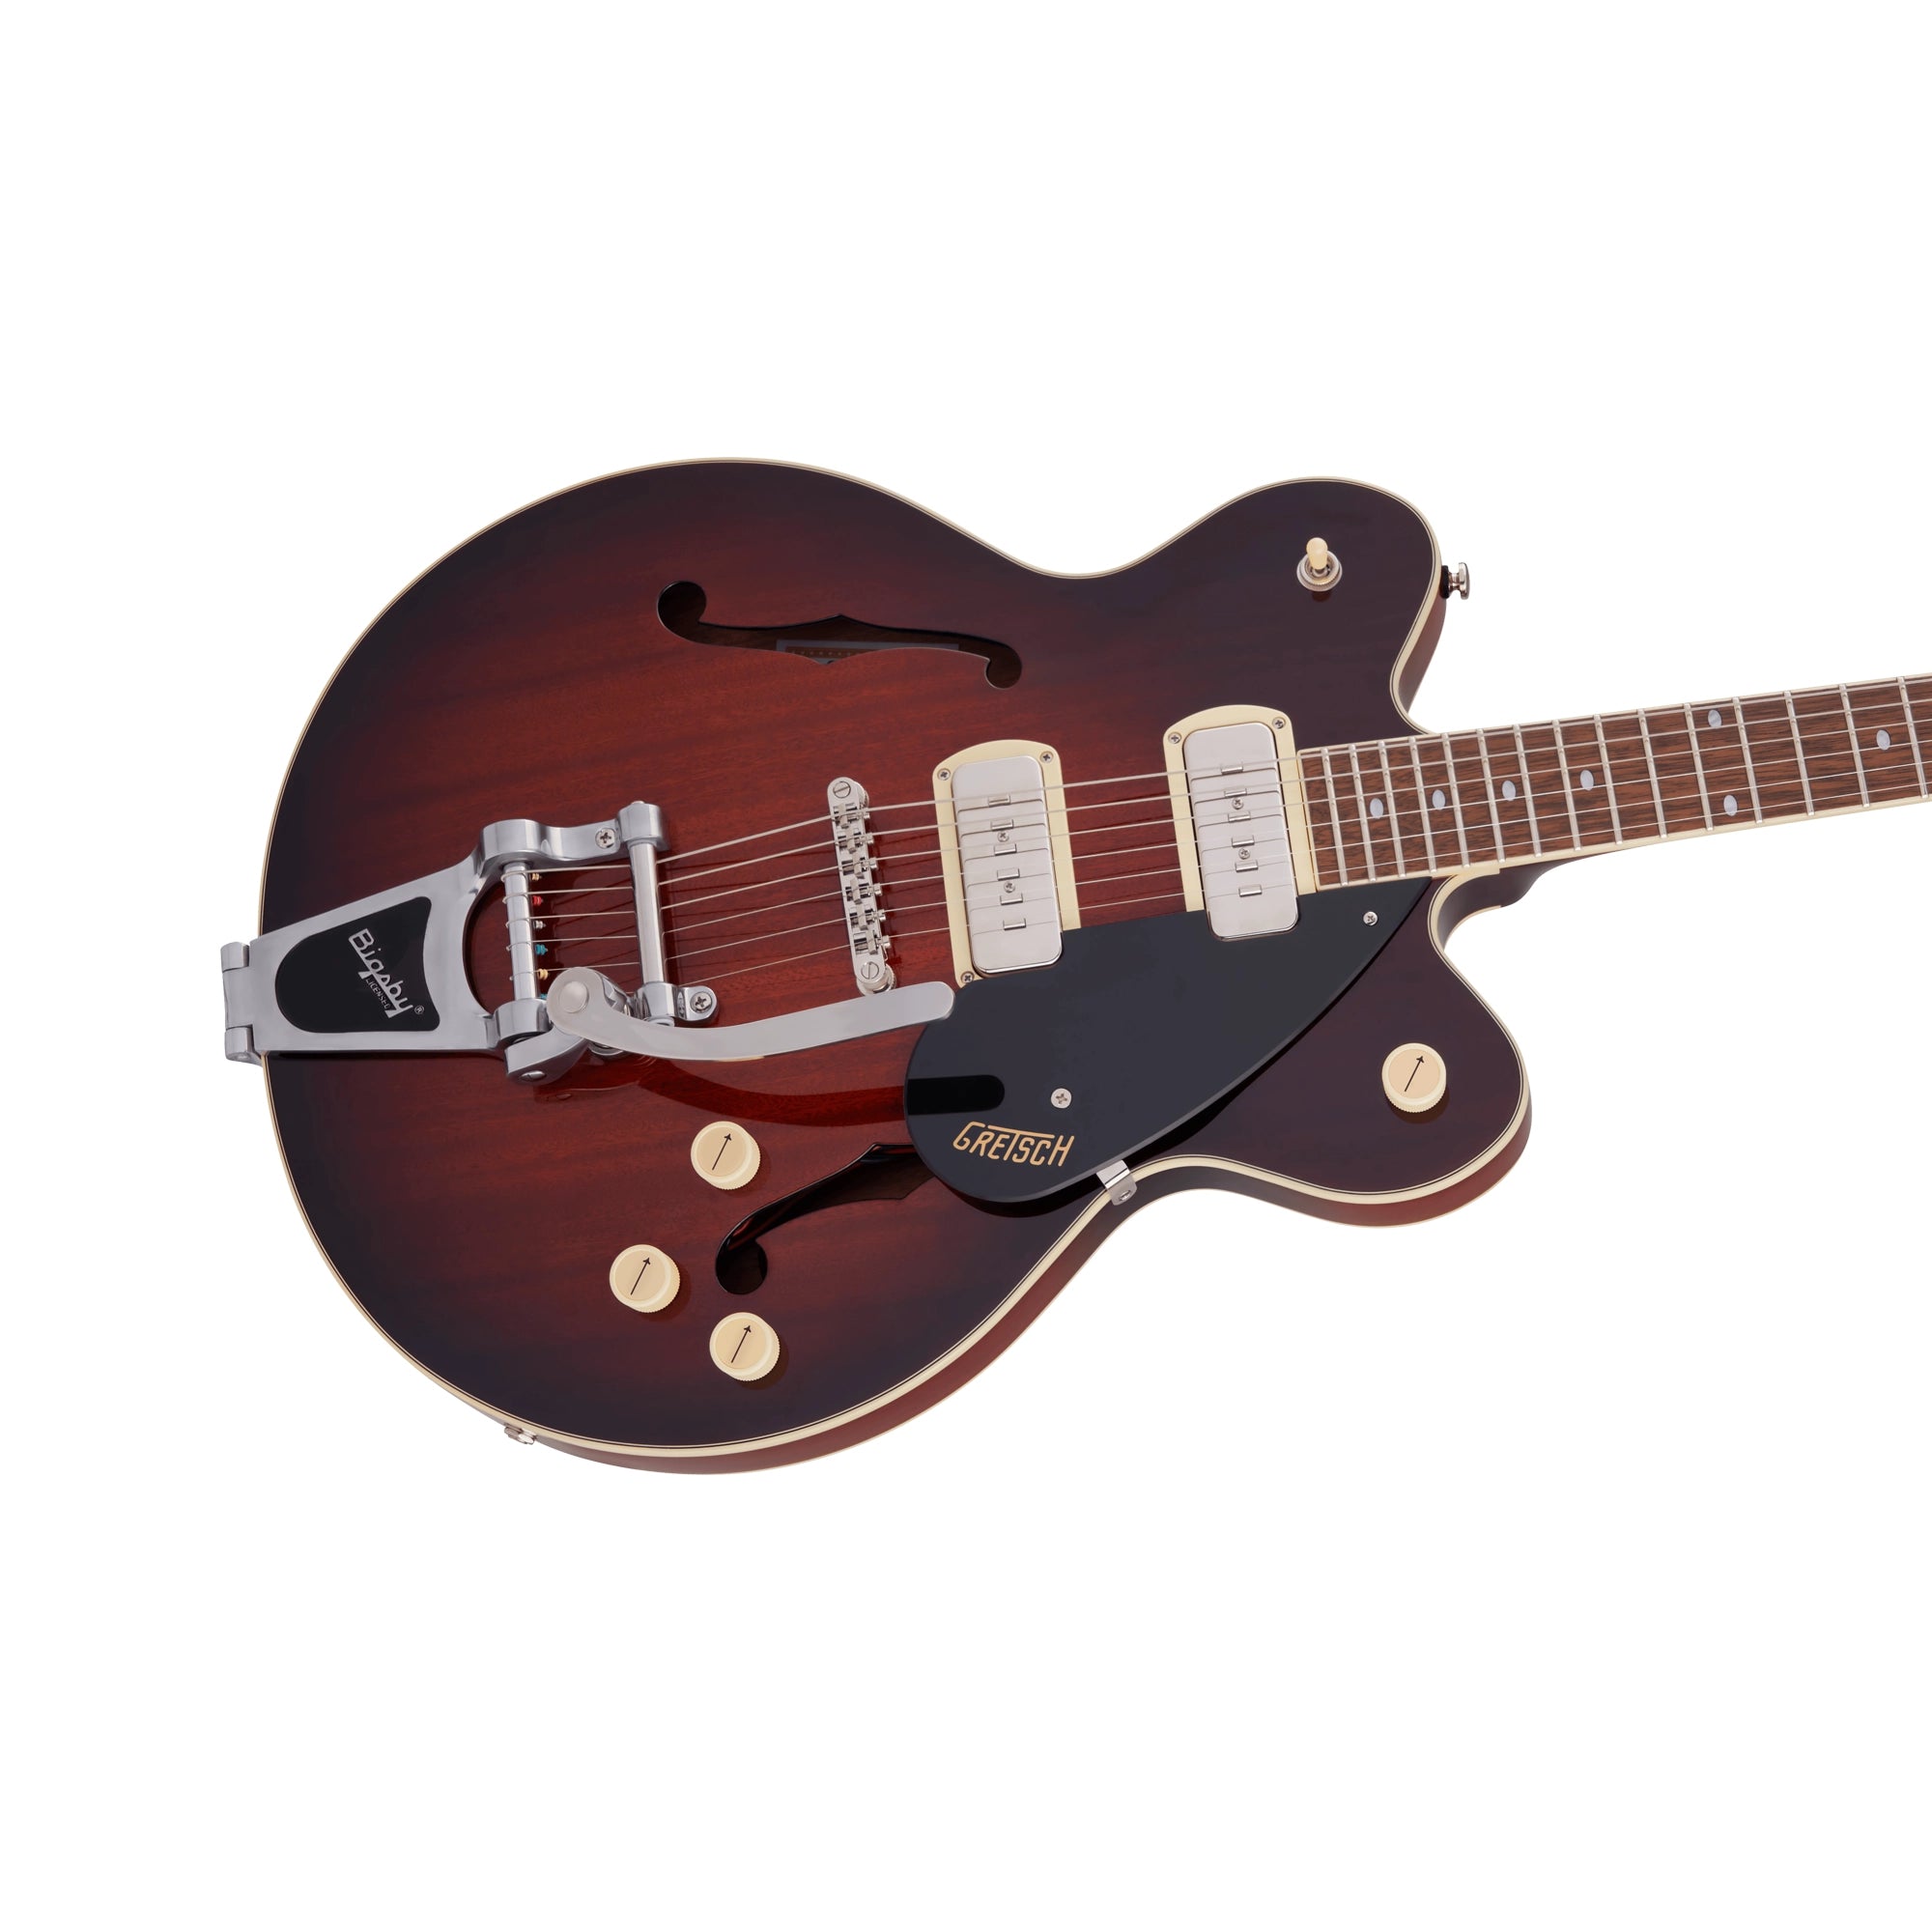 Gretsch G2622T-P90 Streamliner Double Cut Electric Guitar - Forge Glow